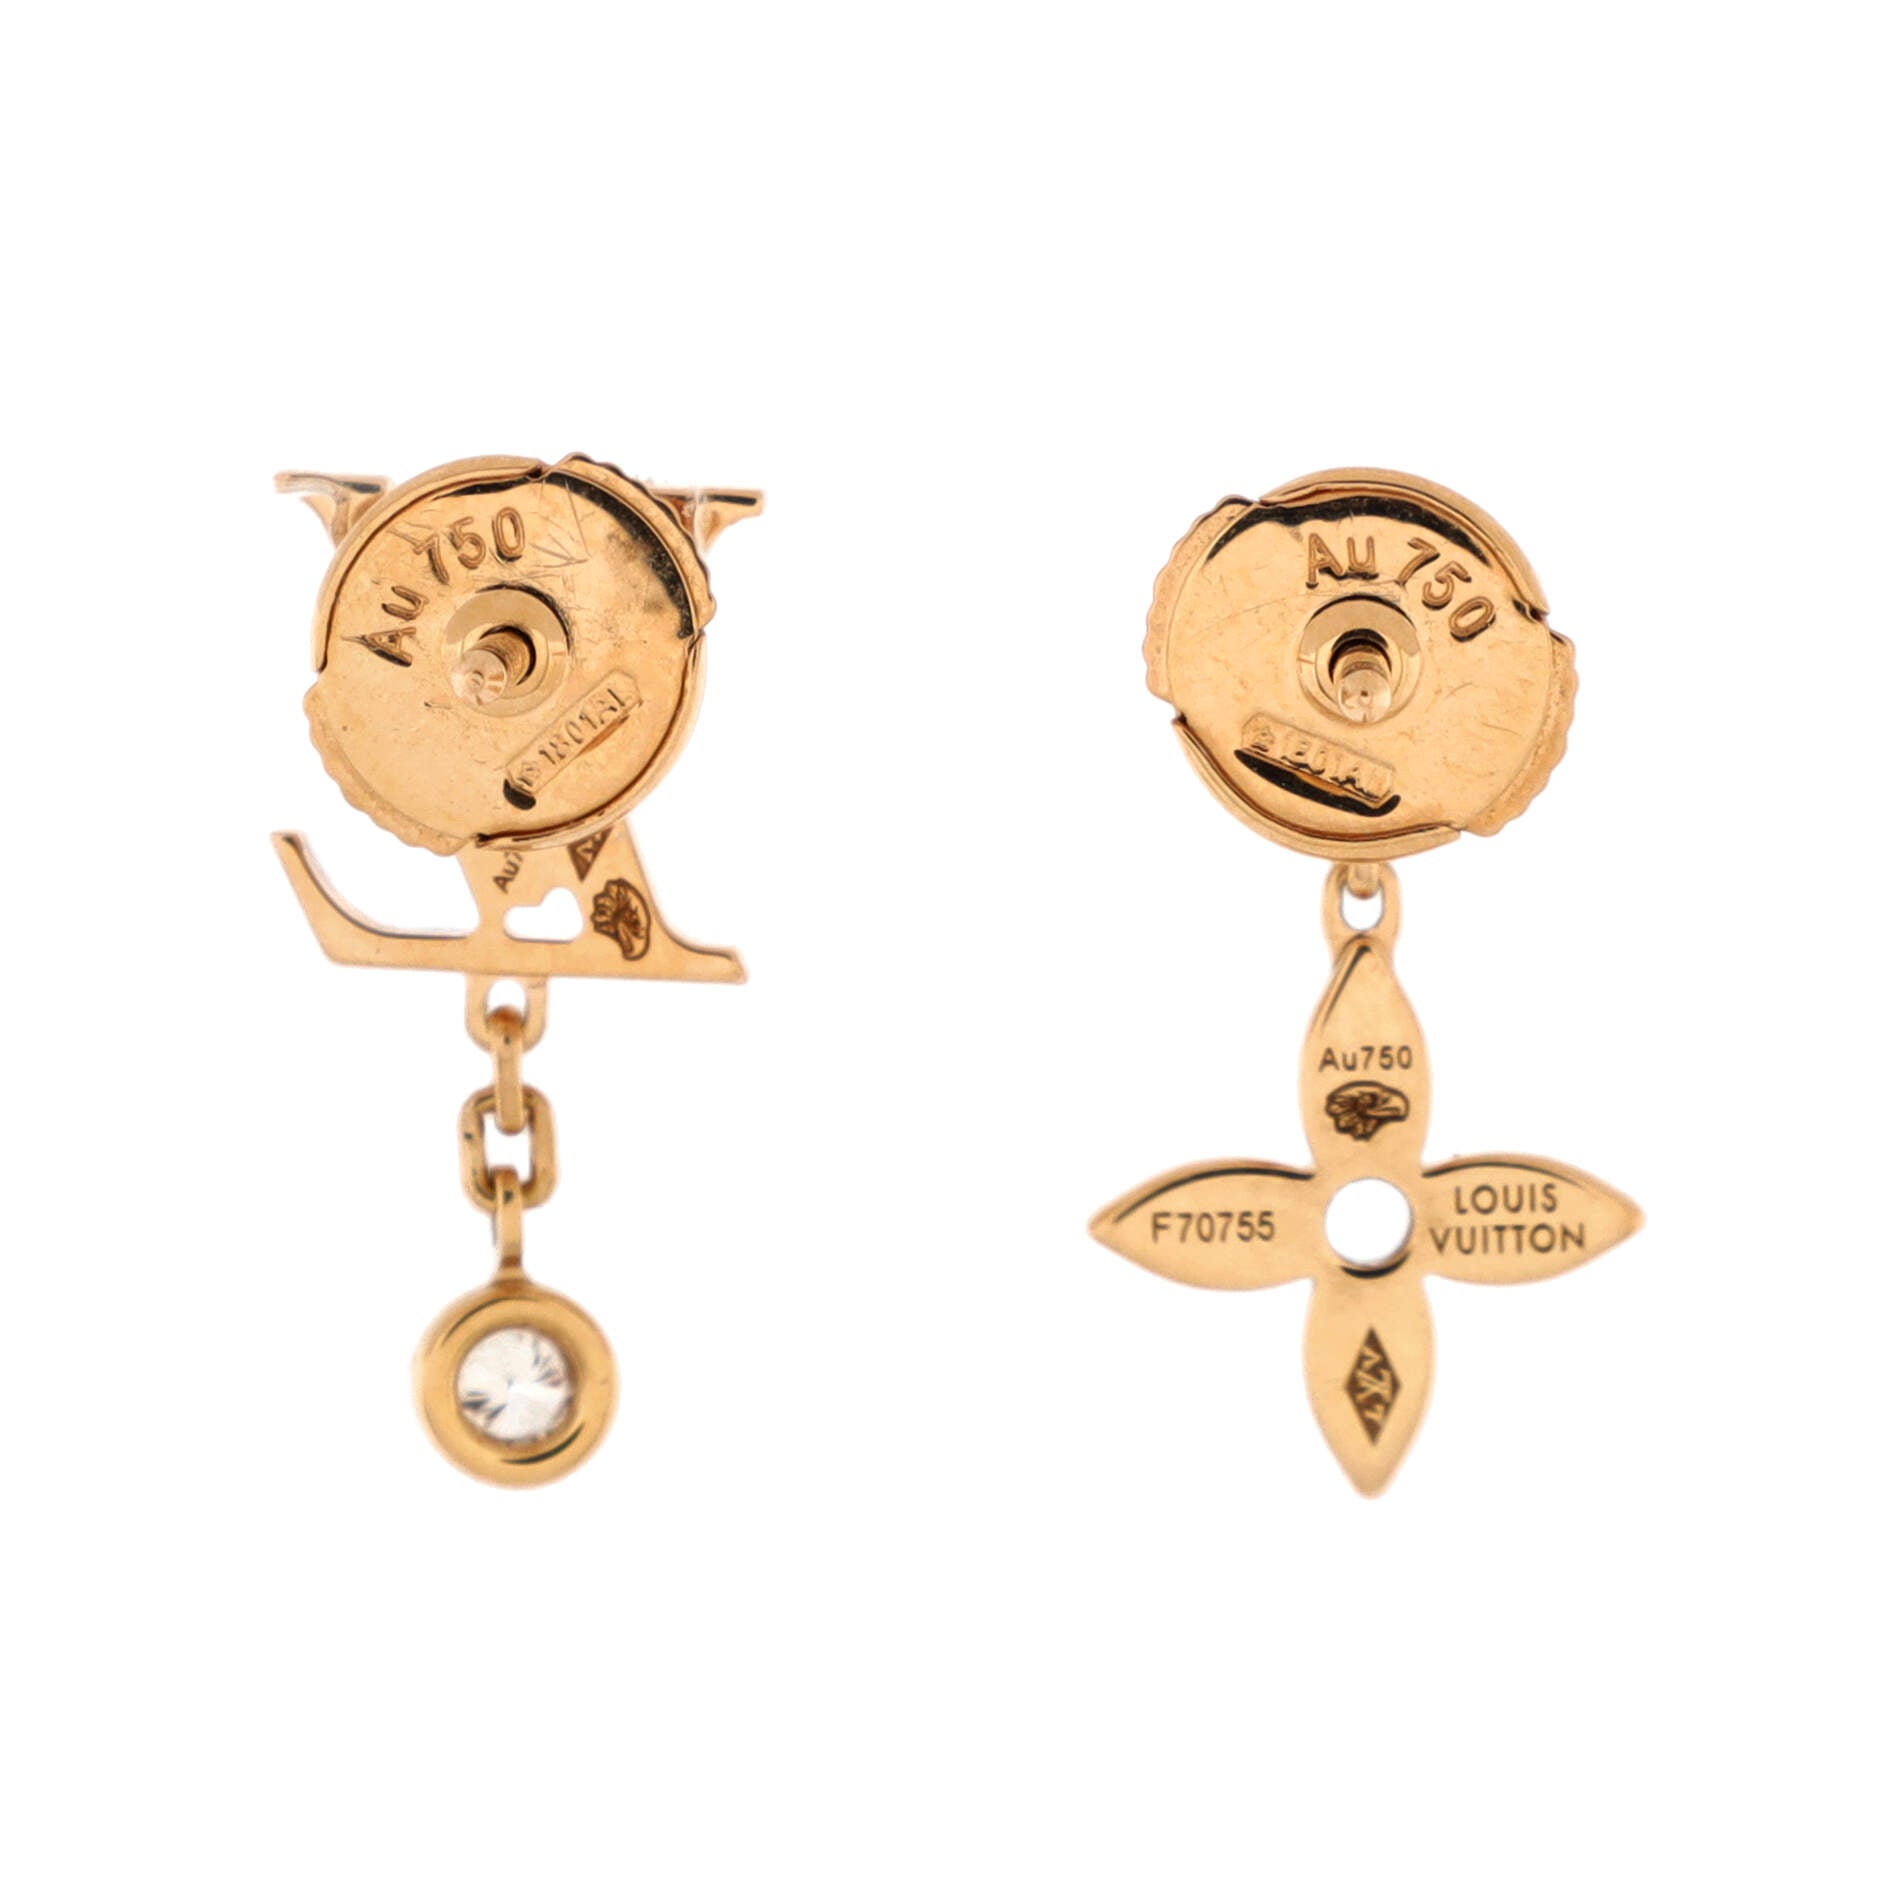 Louis Vuitton Idylle Blossom Monogram Stud Earrings 18K Rose Gold and 18K  Yellow Gold with Diamonds Rose gold 2259481